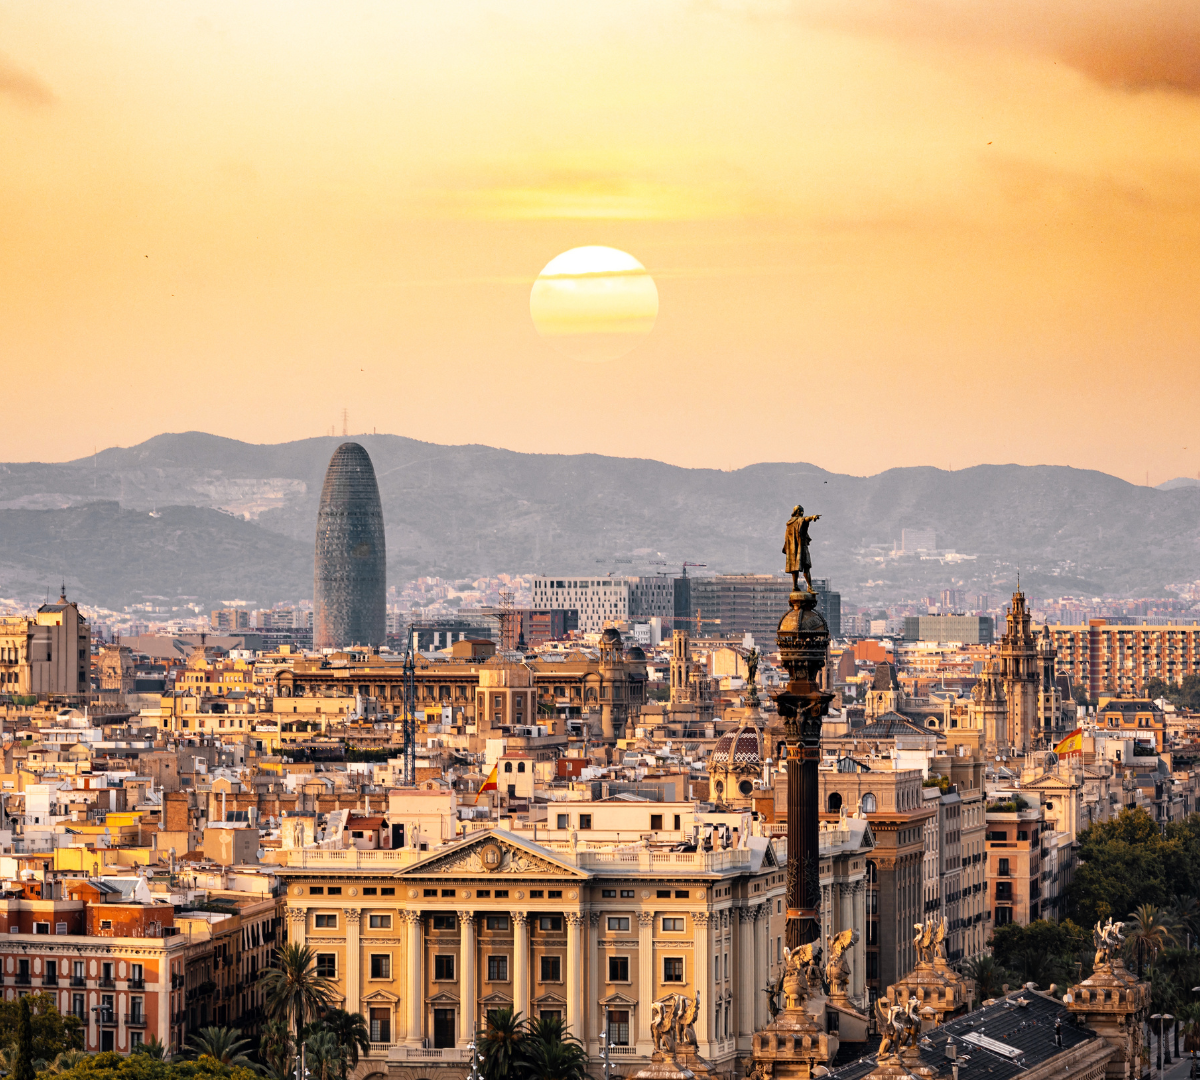 OUR BARCELONA GUIDE: ENCHANTING PLACES IN BARCELONA